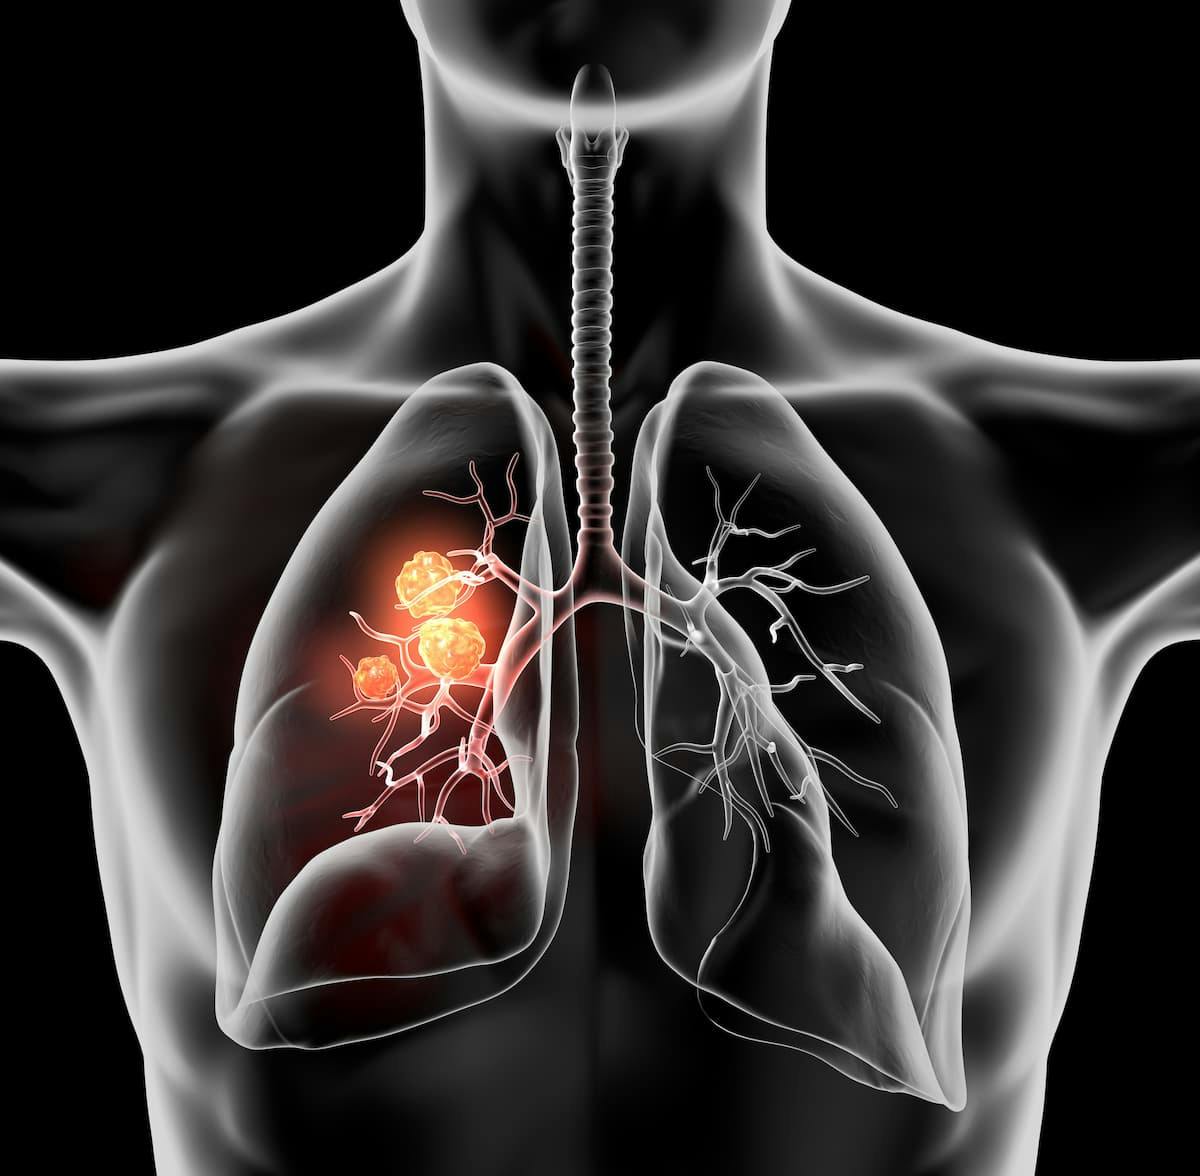 Investigators also report that patritumab deruxtecan is well tolerated in those with EGFR-mutant non–small cell lung cancer in the HERTHENA-Lung01 study.